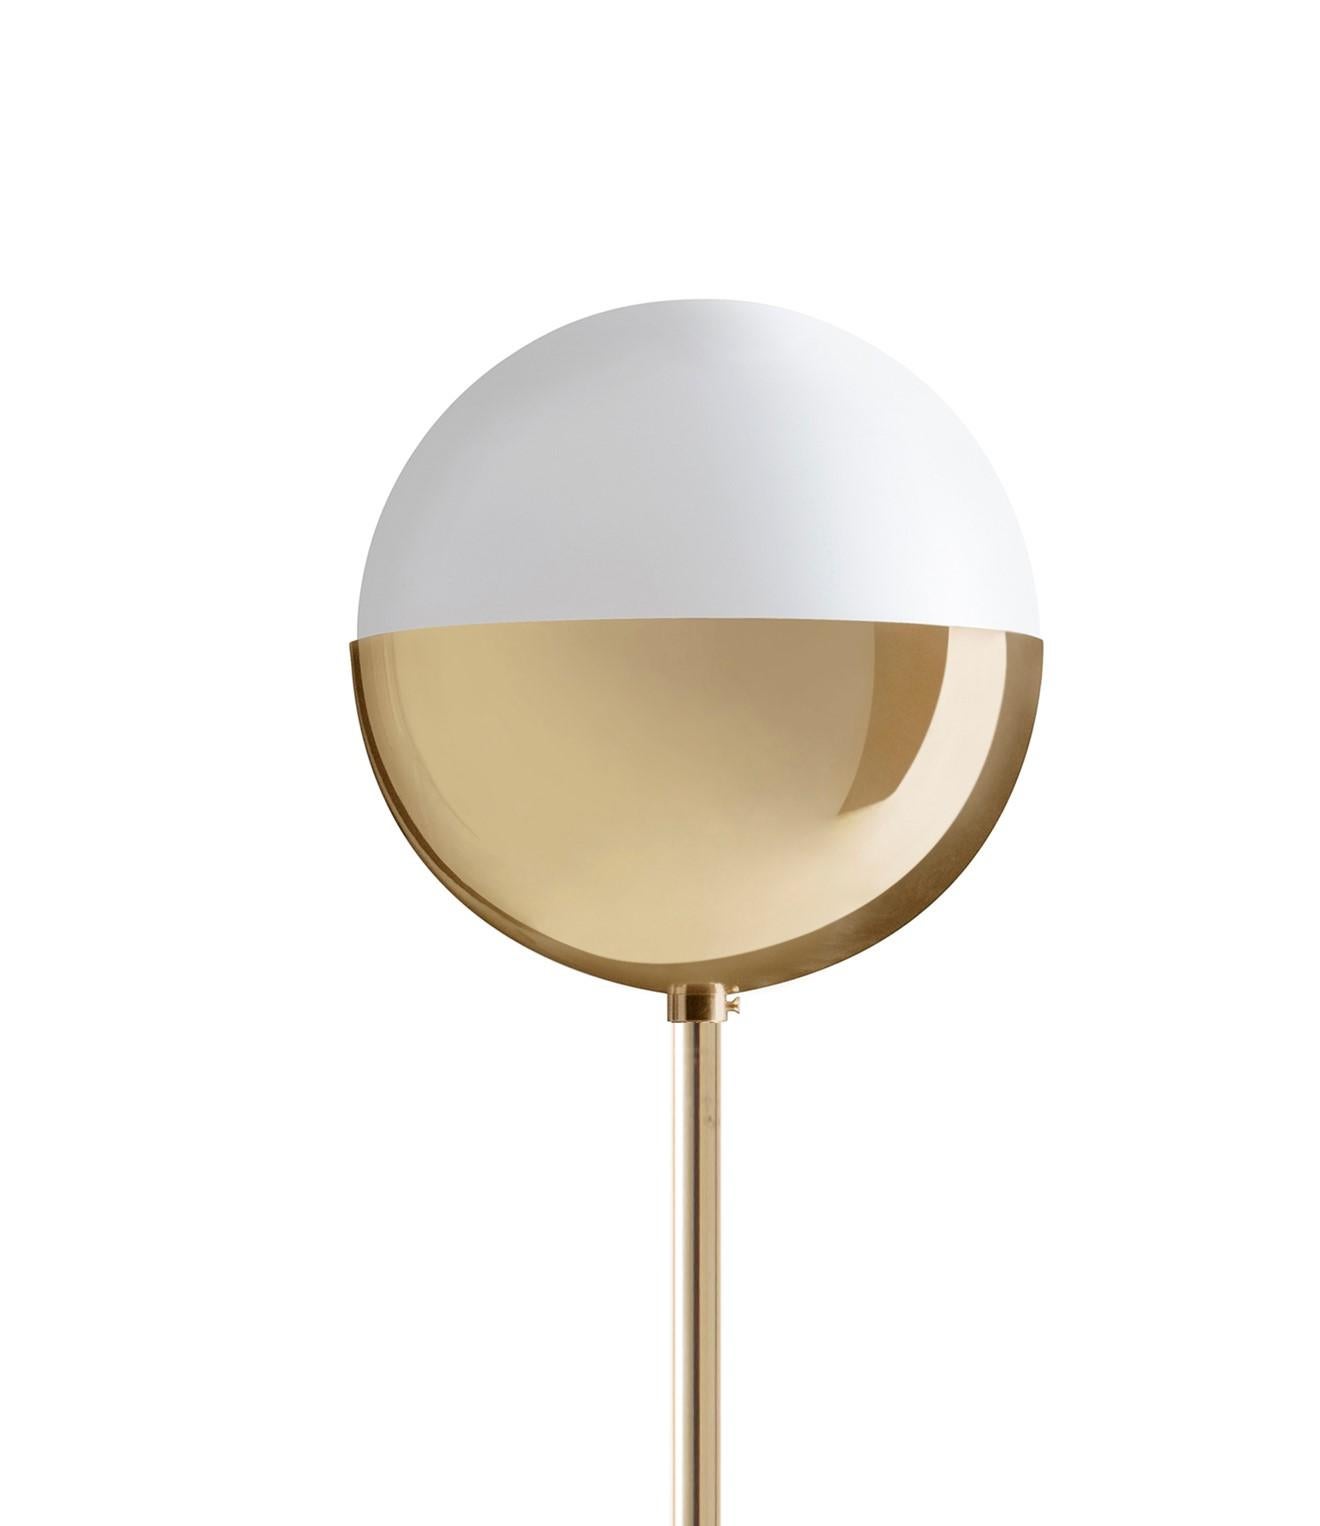 Brass floor lamp 01 Dimmable 160 by Magic Circus Editions
Dimensions: D 25 x H 160 cm
Materials: Brass base, smooth brass tube, glossy mouth blown glass
Non-Dimmable version available.


Rethinking, reimagining, redesigning familiar objects